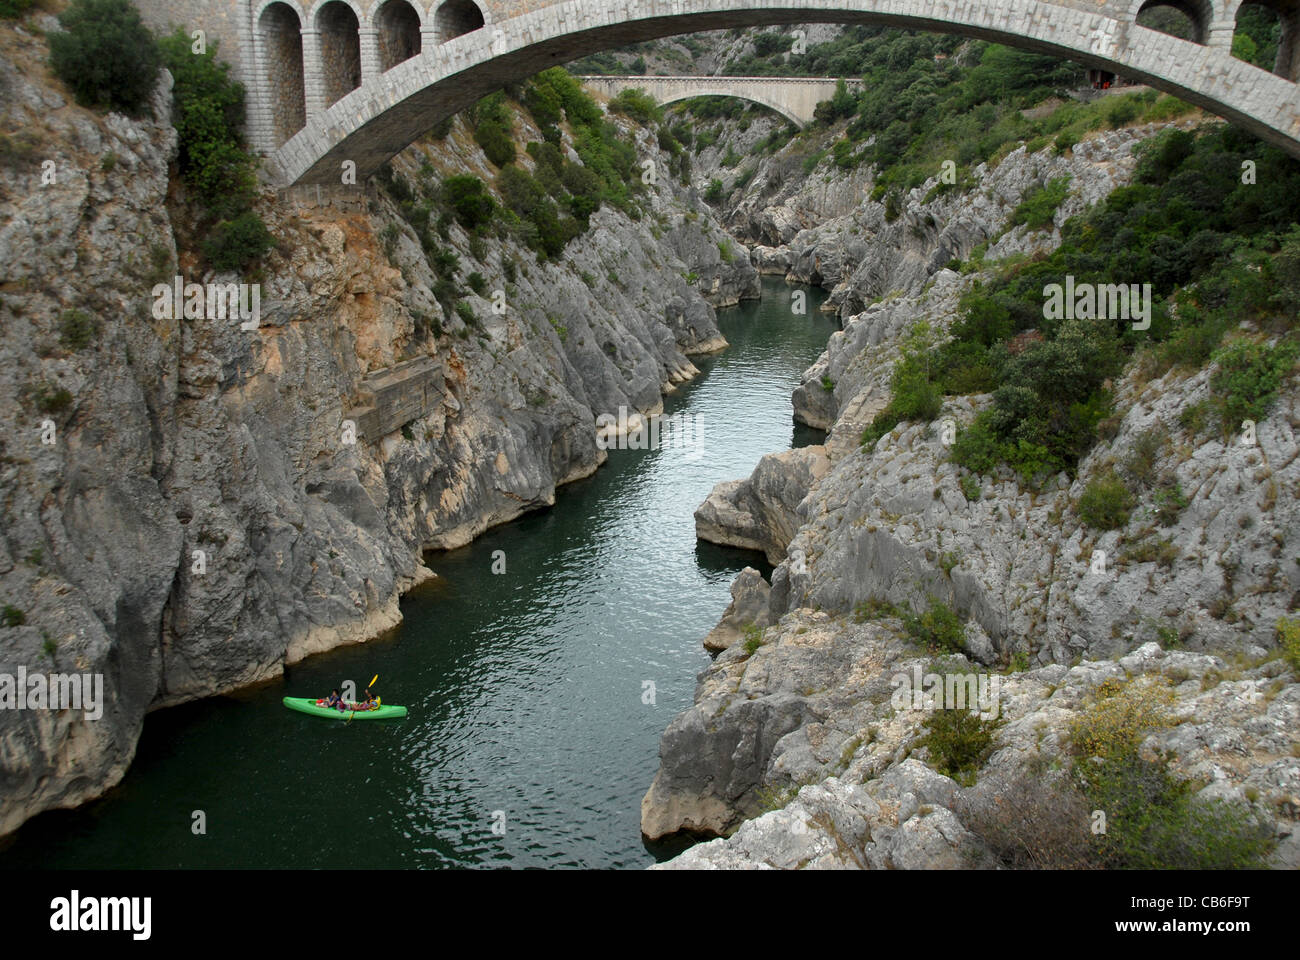 Canyon of the l'Herault, the canoeing paradise Herault river; at Pont du Diable near St-Guilhem-le-Désert in Lqanguedoc, France Stock Photo